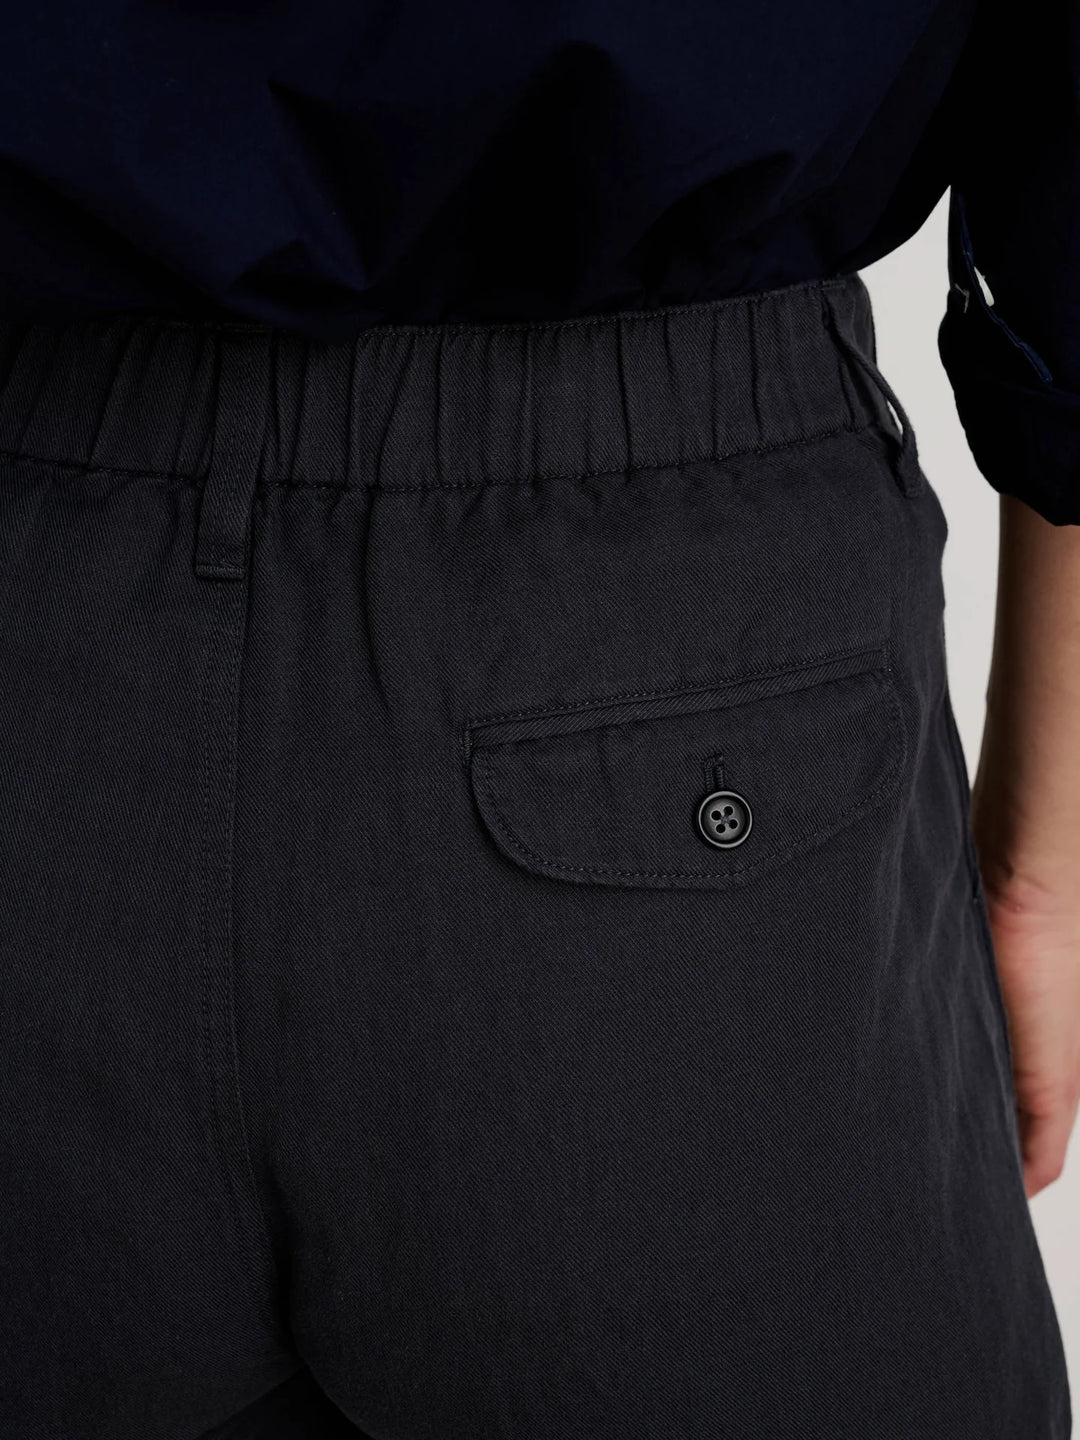 Pleated Short in Twill